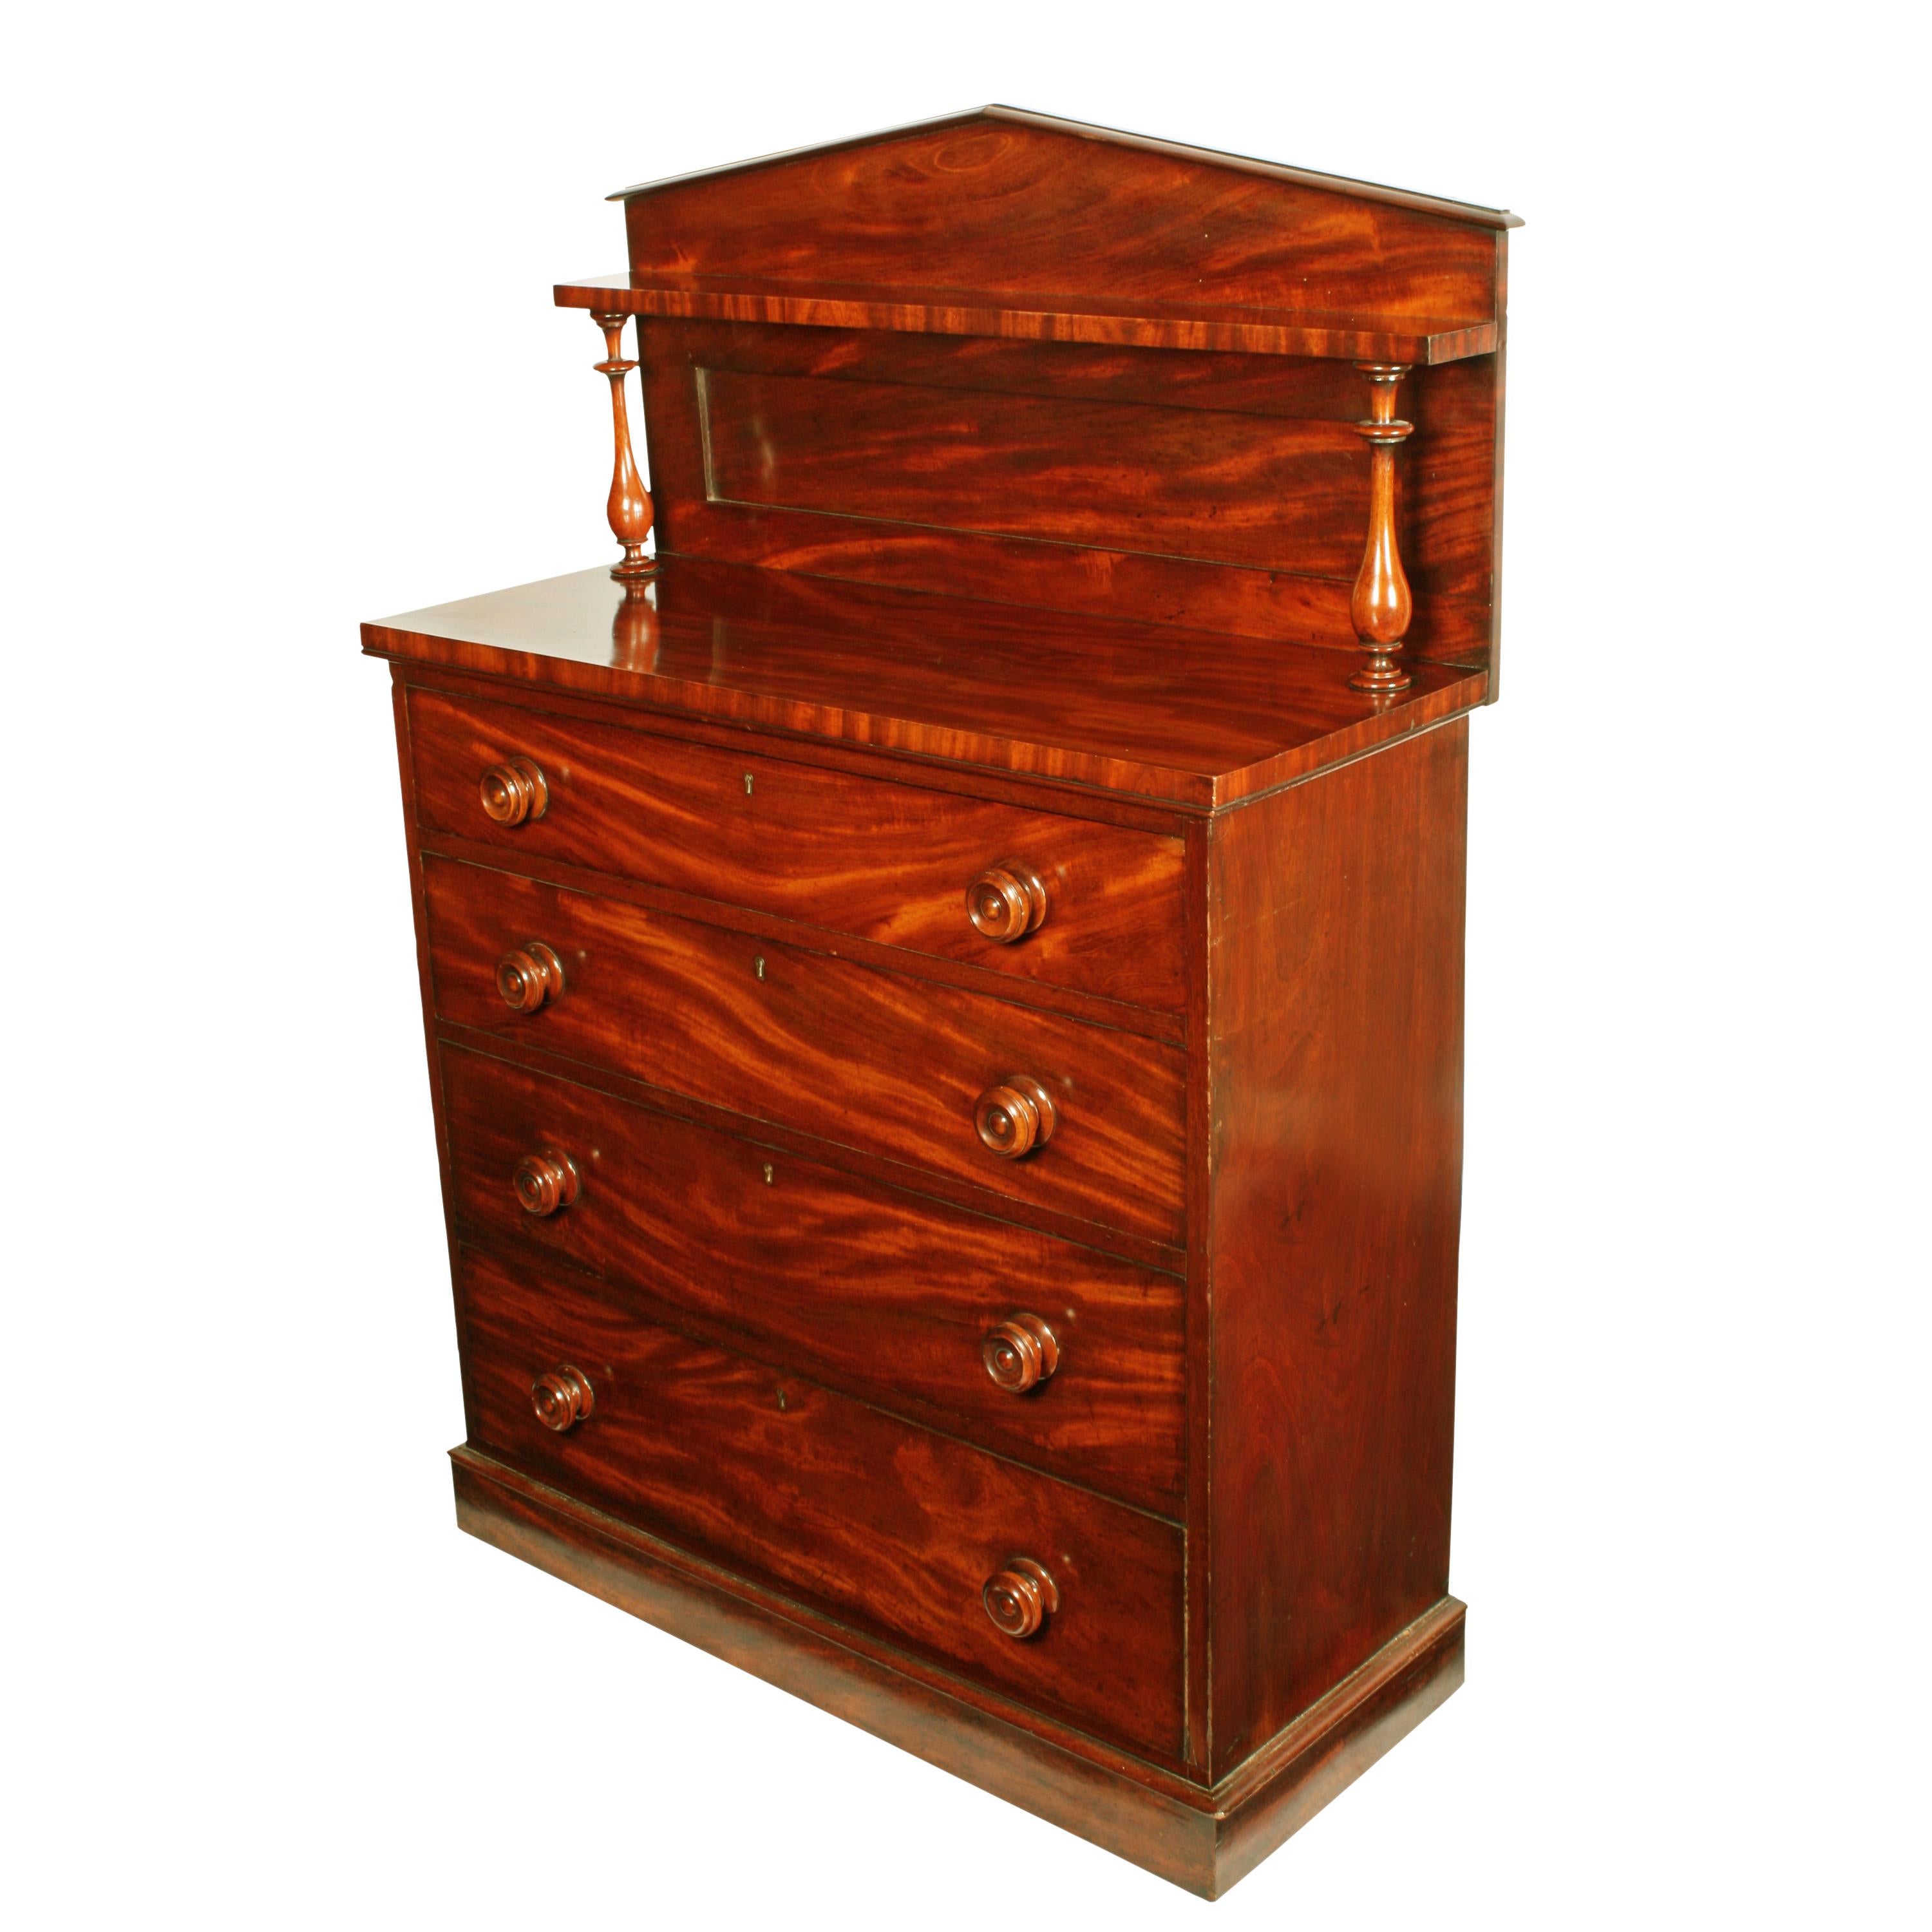 Unusual Victorian mahogany chest


A very unusual Victorian mahogany narrow chest of drawers.

The chest has four graduated pine lined drawers with knob handles and original blue sugar paper in the drawer bottoms.

The top of the chest has a